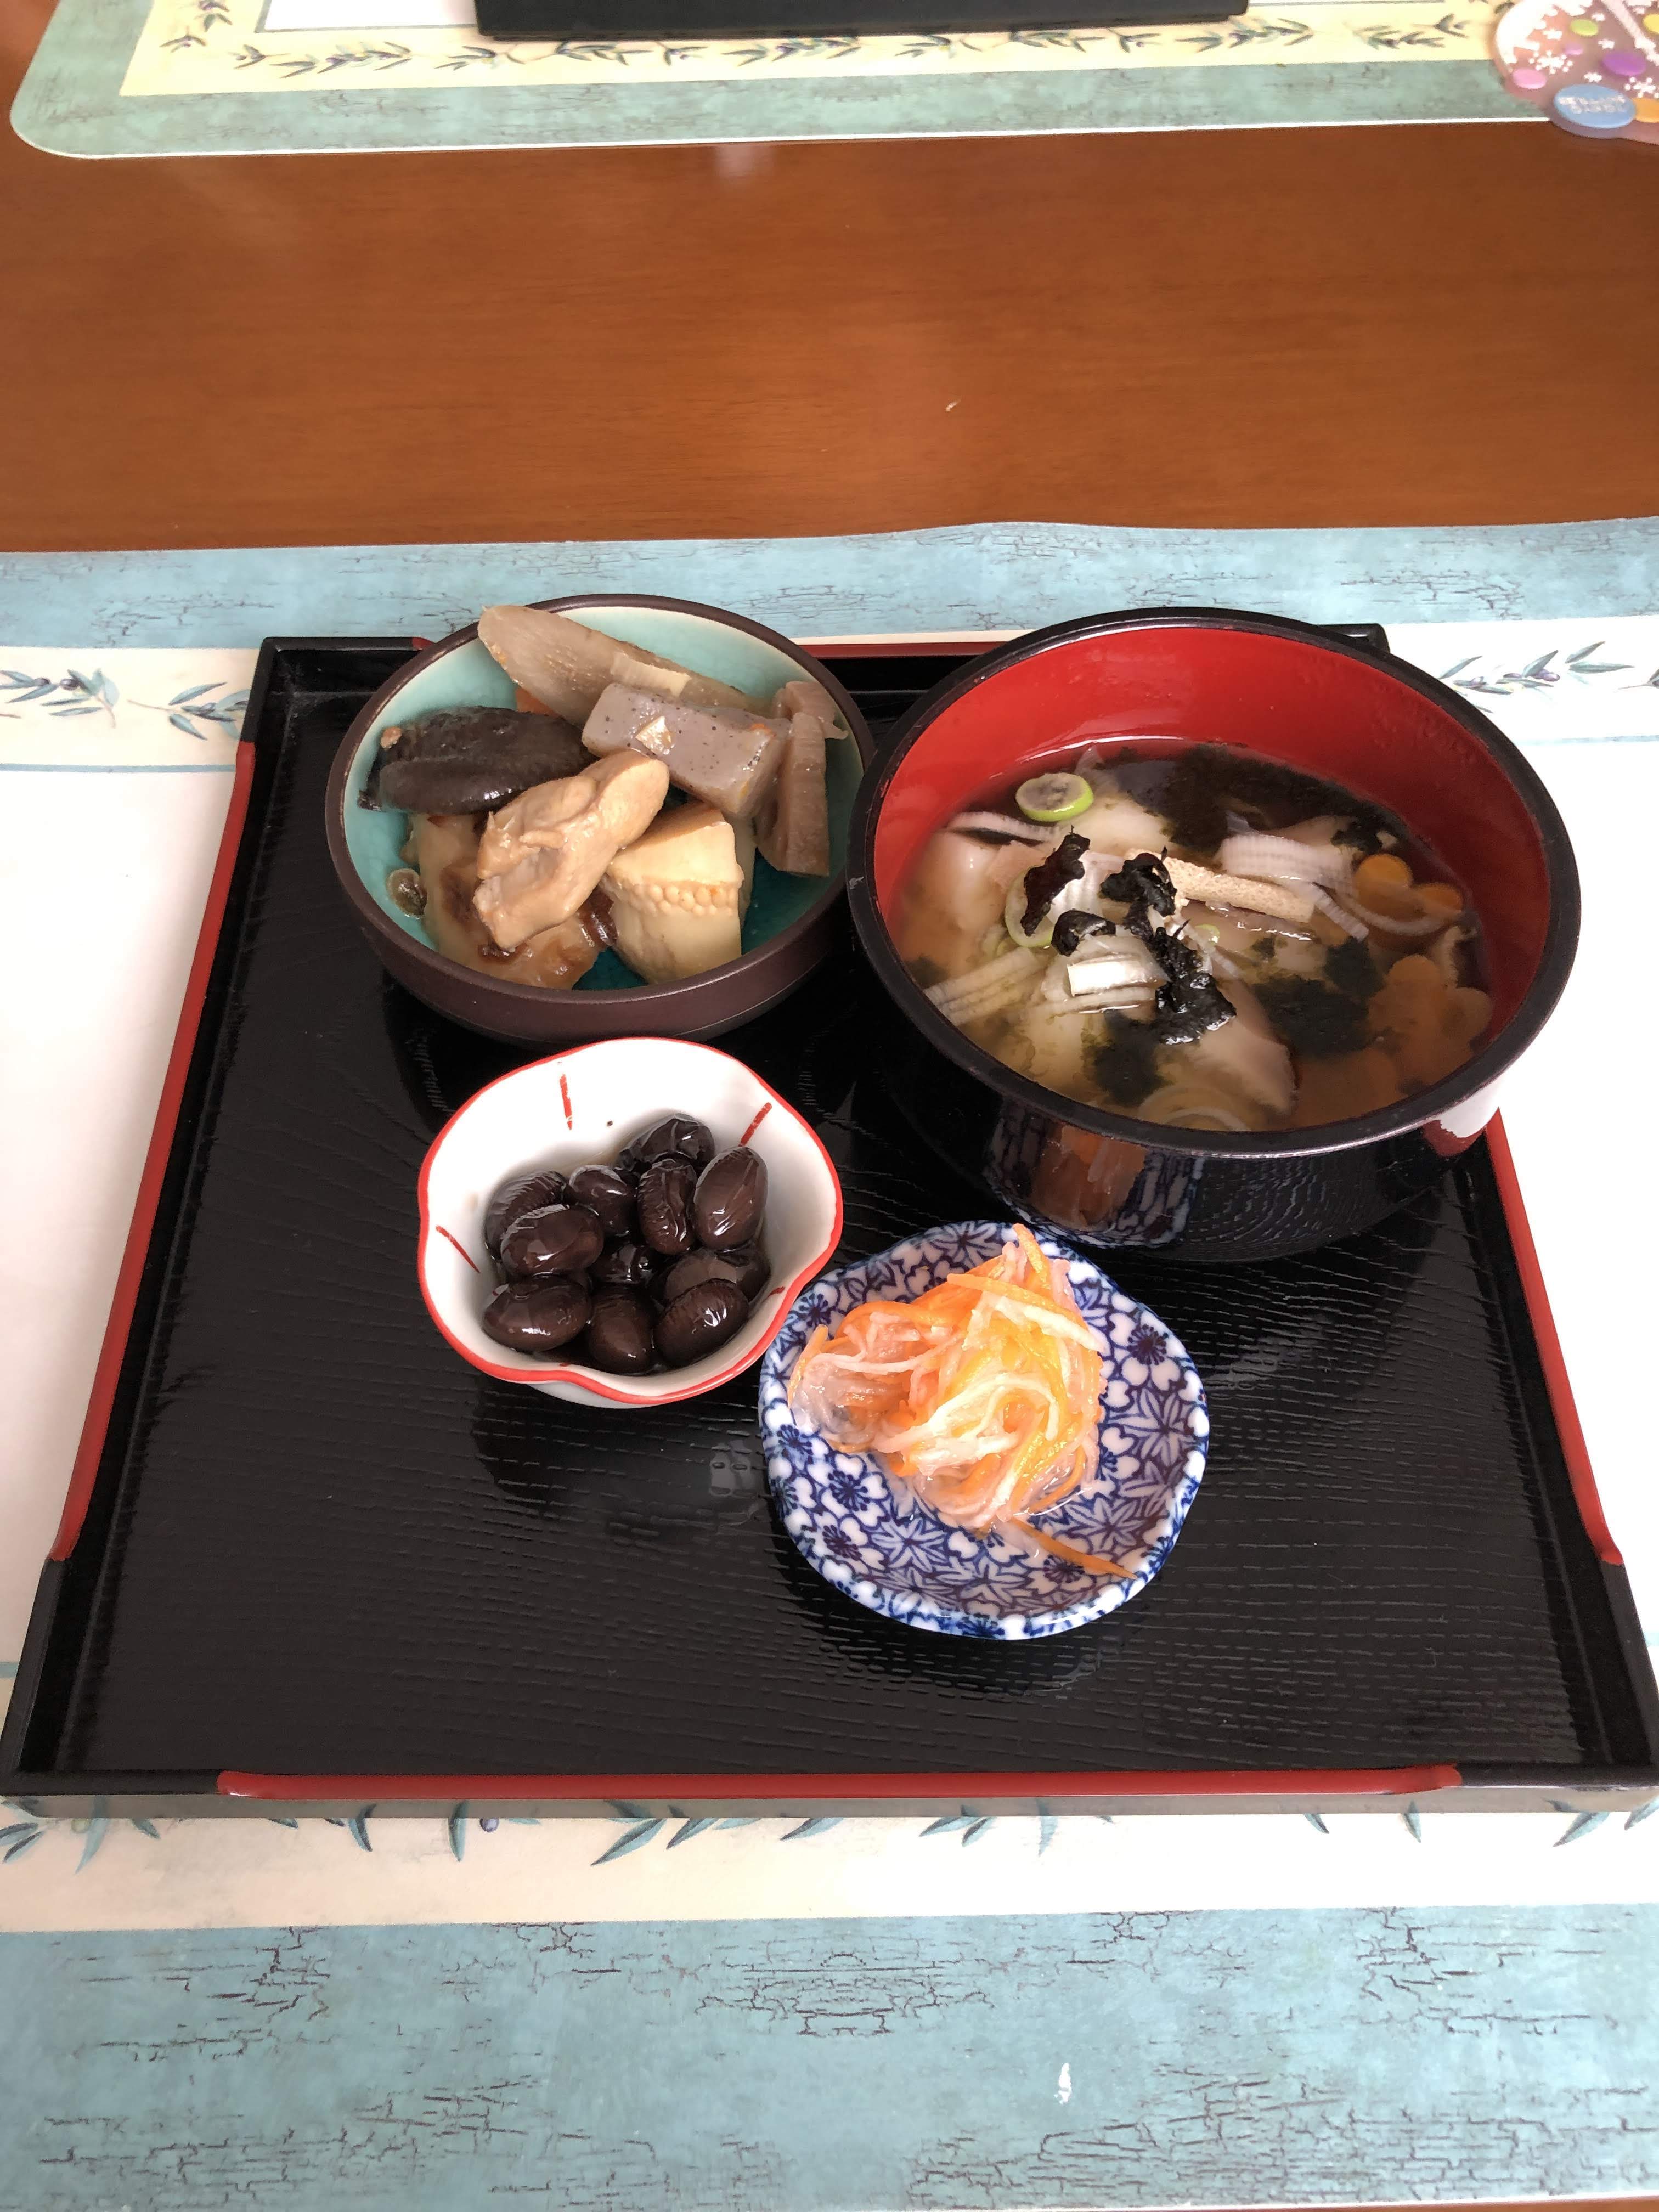 Ozouni, a traditional New Year's soup, and side dishes